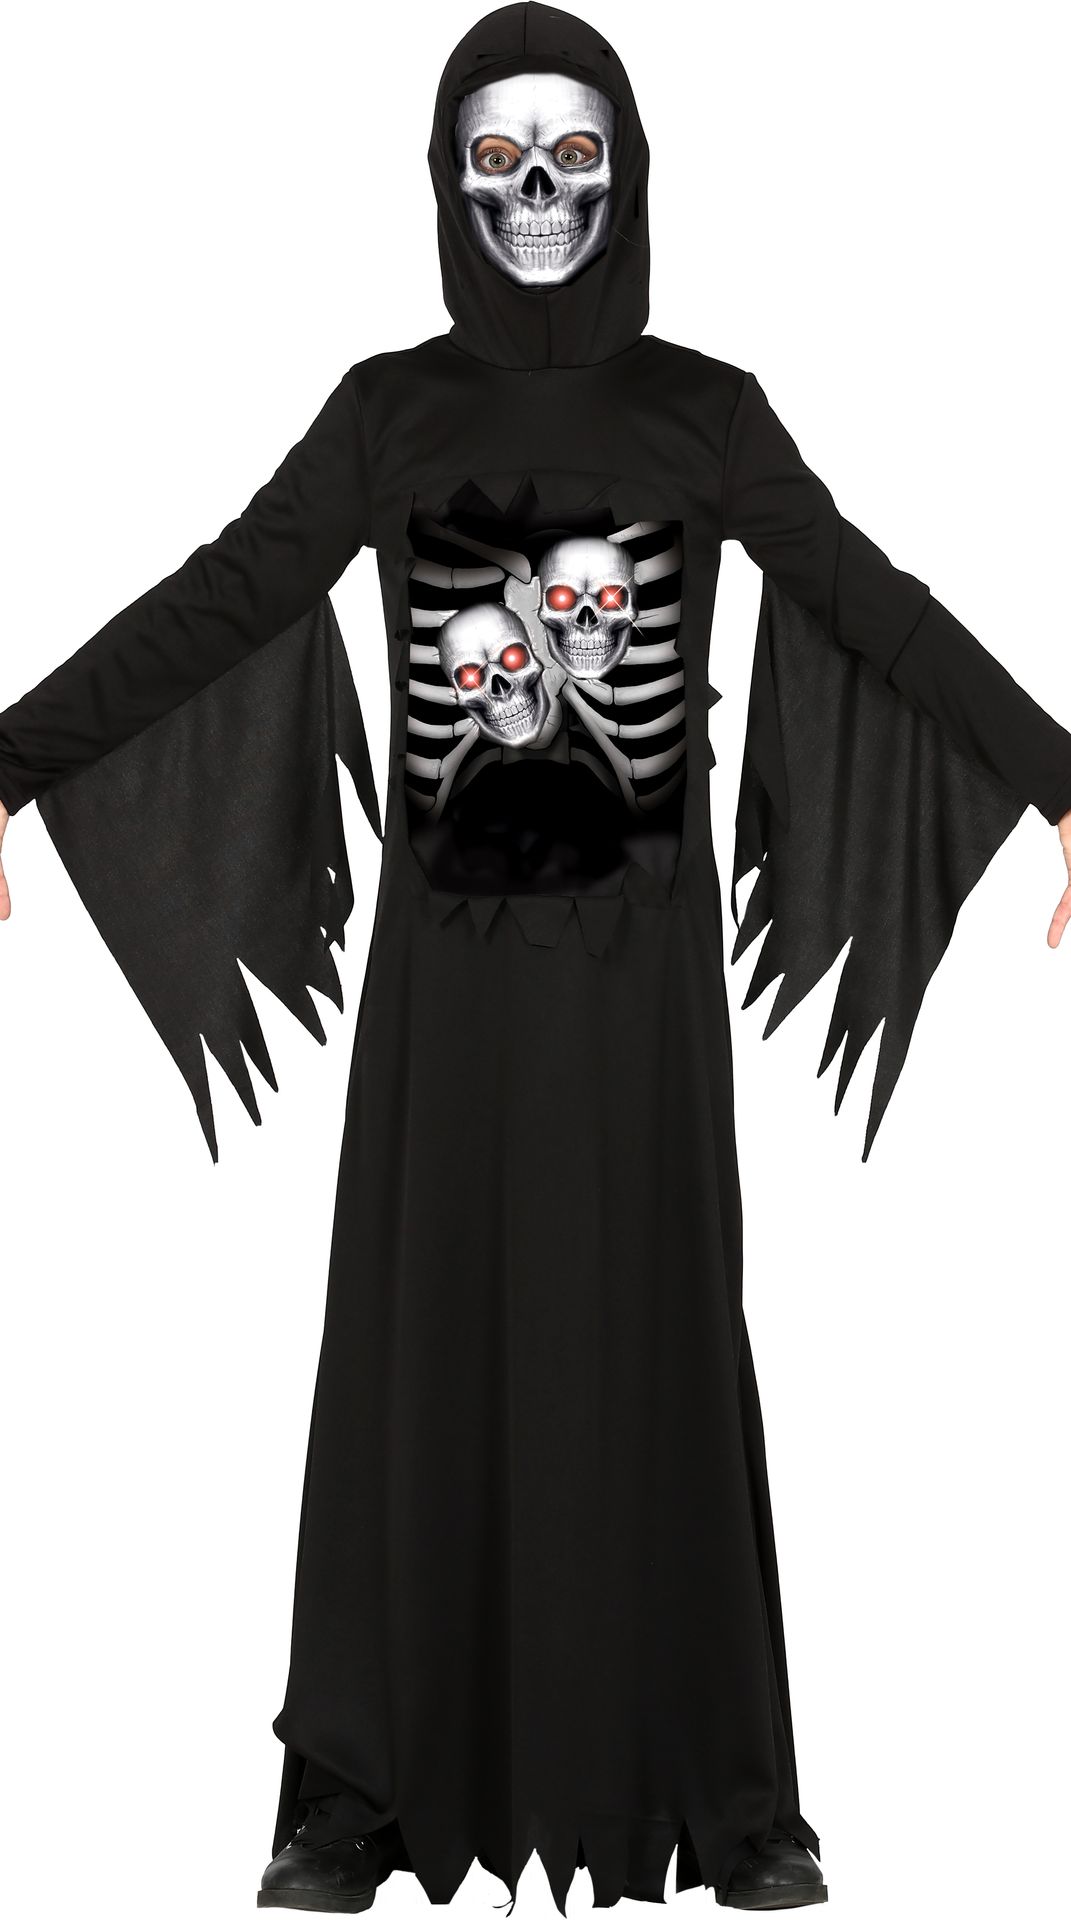 Grim reaper outfit kind